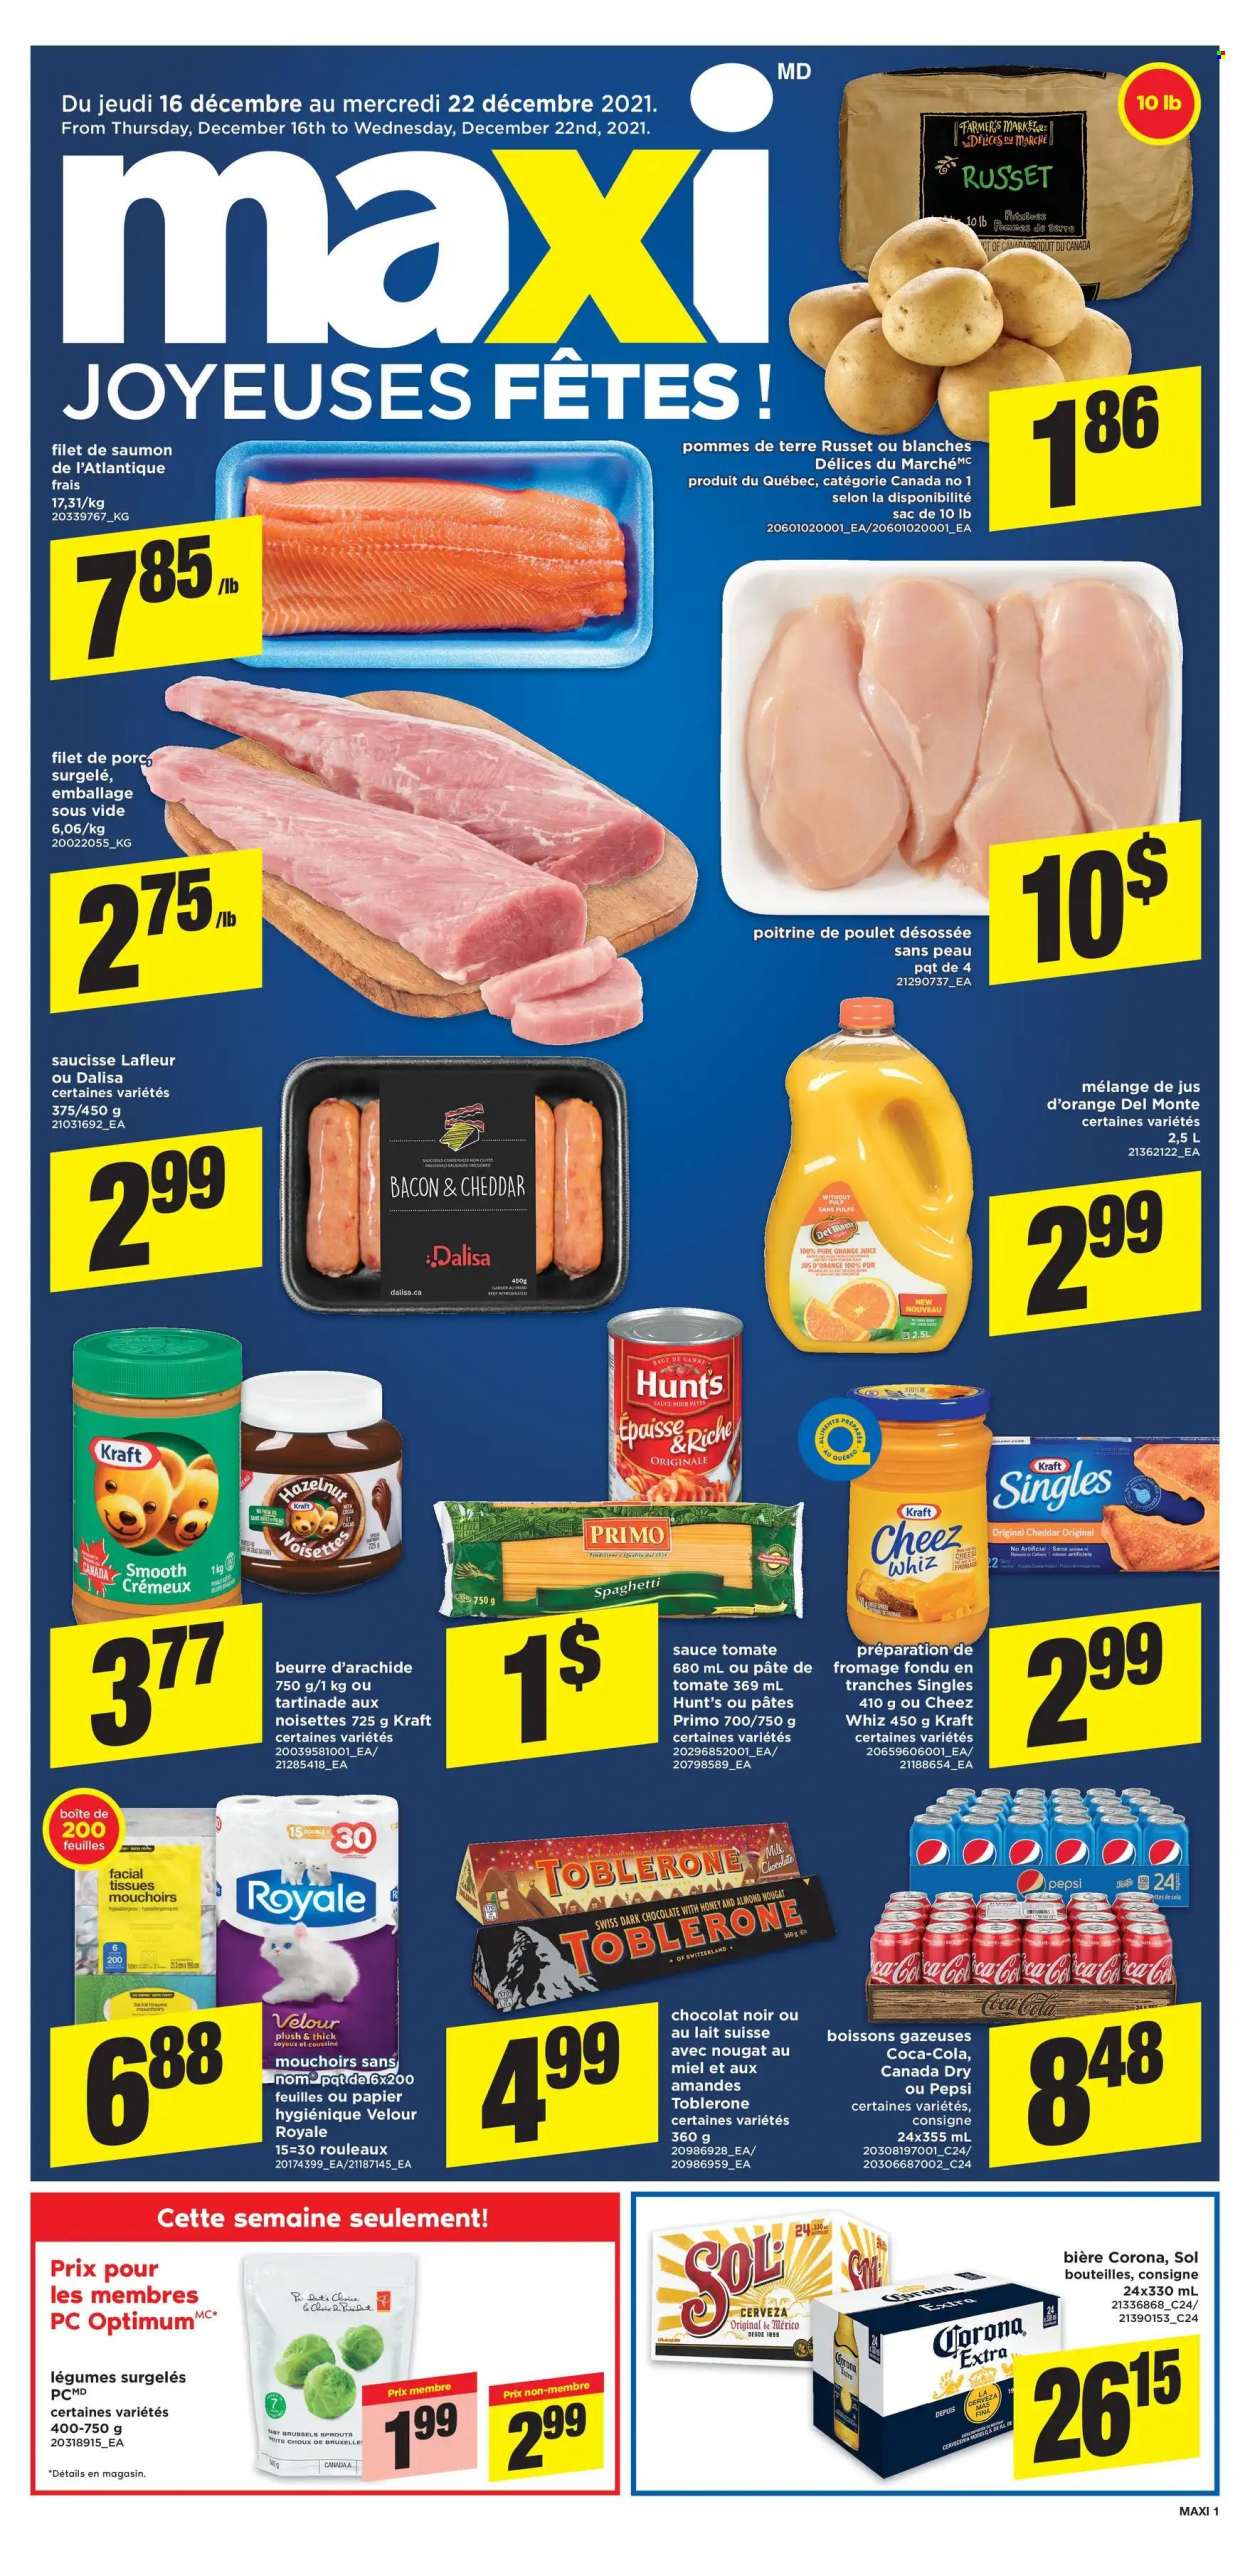 thumbnail - Maxi & Cie Flyer - December 16, 2021 - December 22, 2021 - Sales products - russet potatoes, brussel sprouts, spaghetti, sauce, Kraft®, bacon, cheese, chocolate, dark chocolate, Toblerone, Canada Dry, Coca-Cola, Pepsi, orange juice, juice, beer, Corona Extra, Sol, tissues, facial tissues, nougat. Page 1.